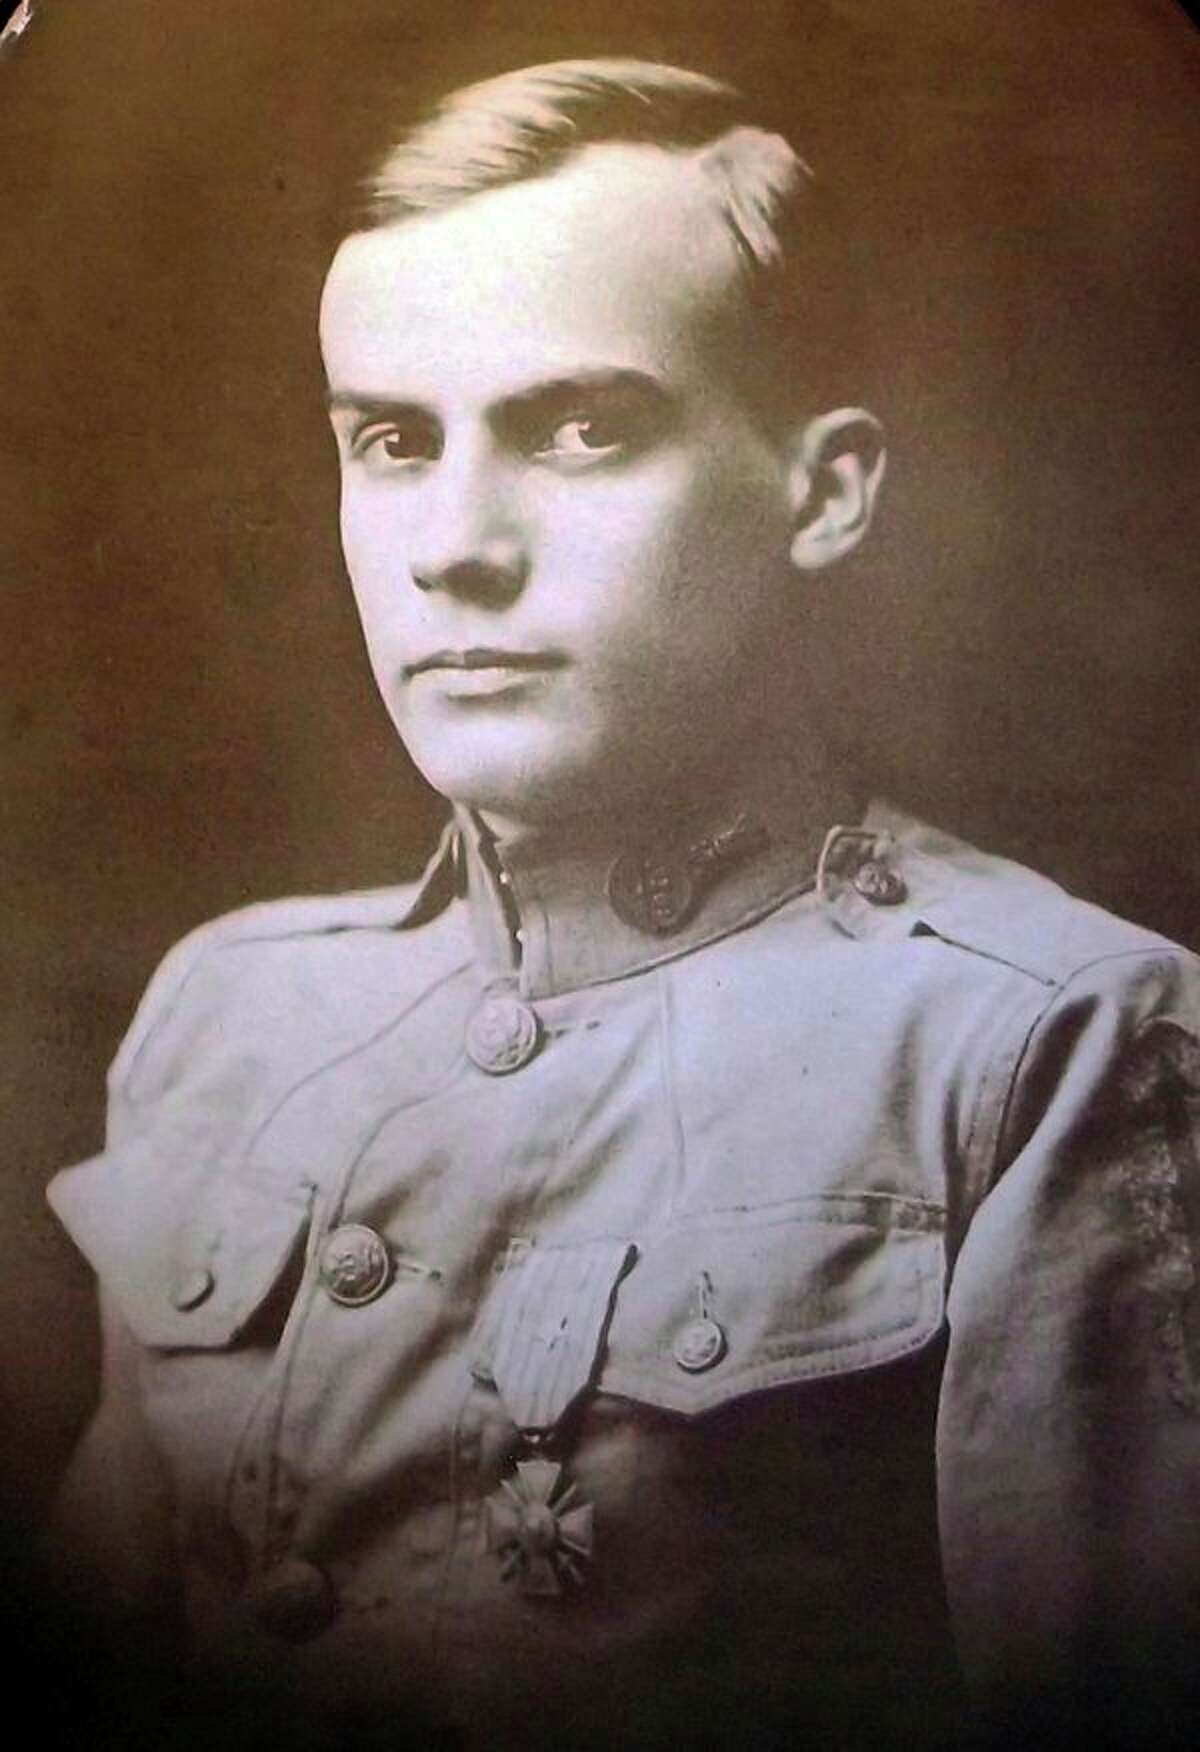 Alva Henry Cook poses for a formal portrait in his World War I uniform. As a 'runner' delivering messages on the battlefield, he saved a platoon commander and his 27 men from carrying out an order to attack the enemy. He received the Croix de Guerre for this action.